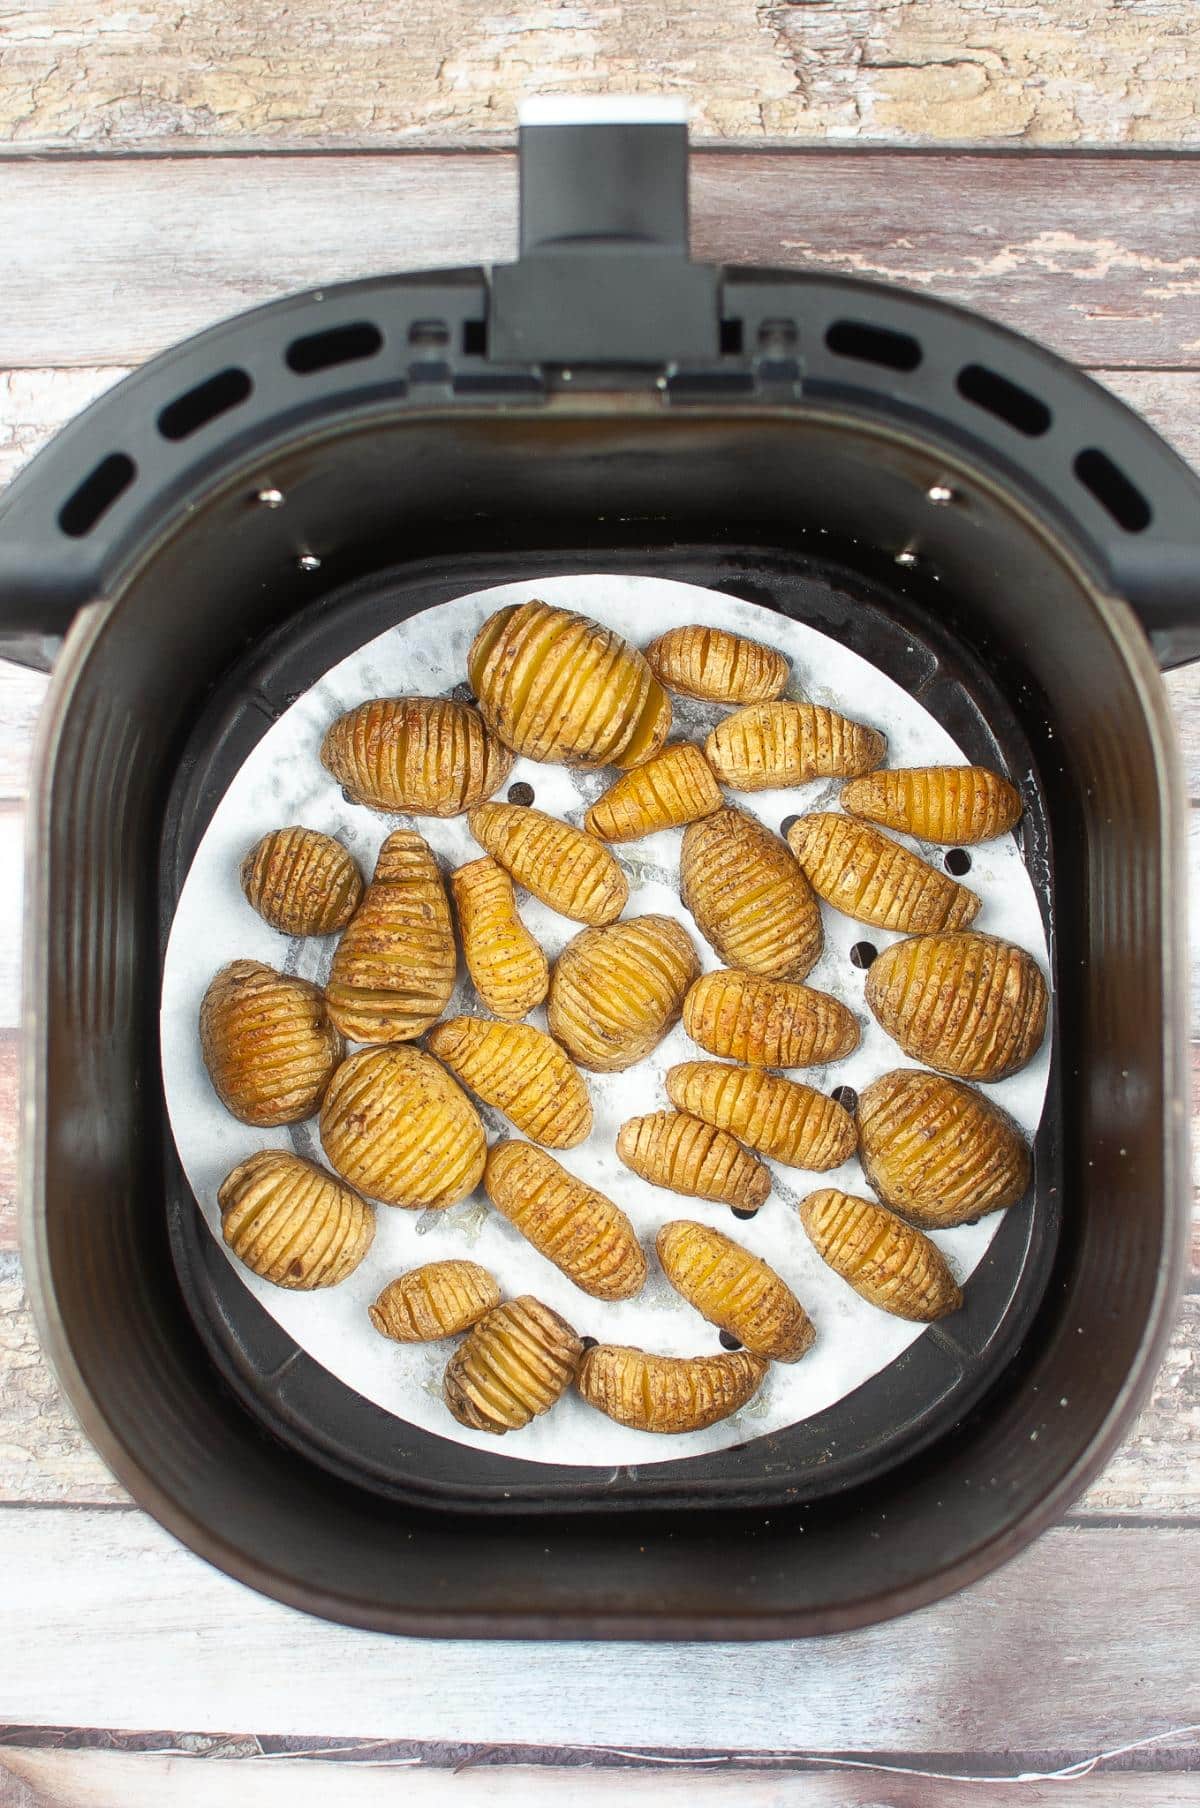 Hasselback potatoes cooked in an air fryer.